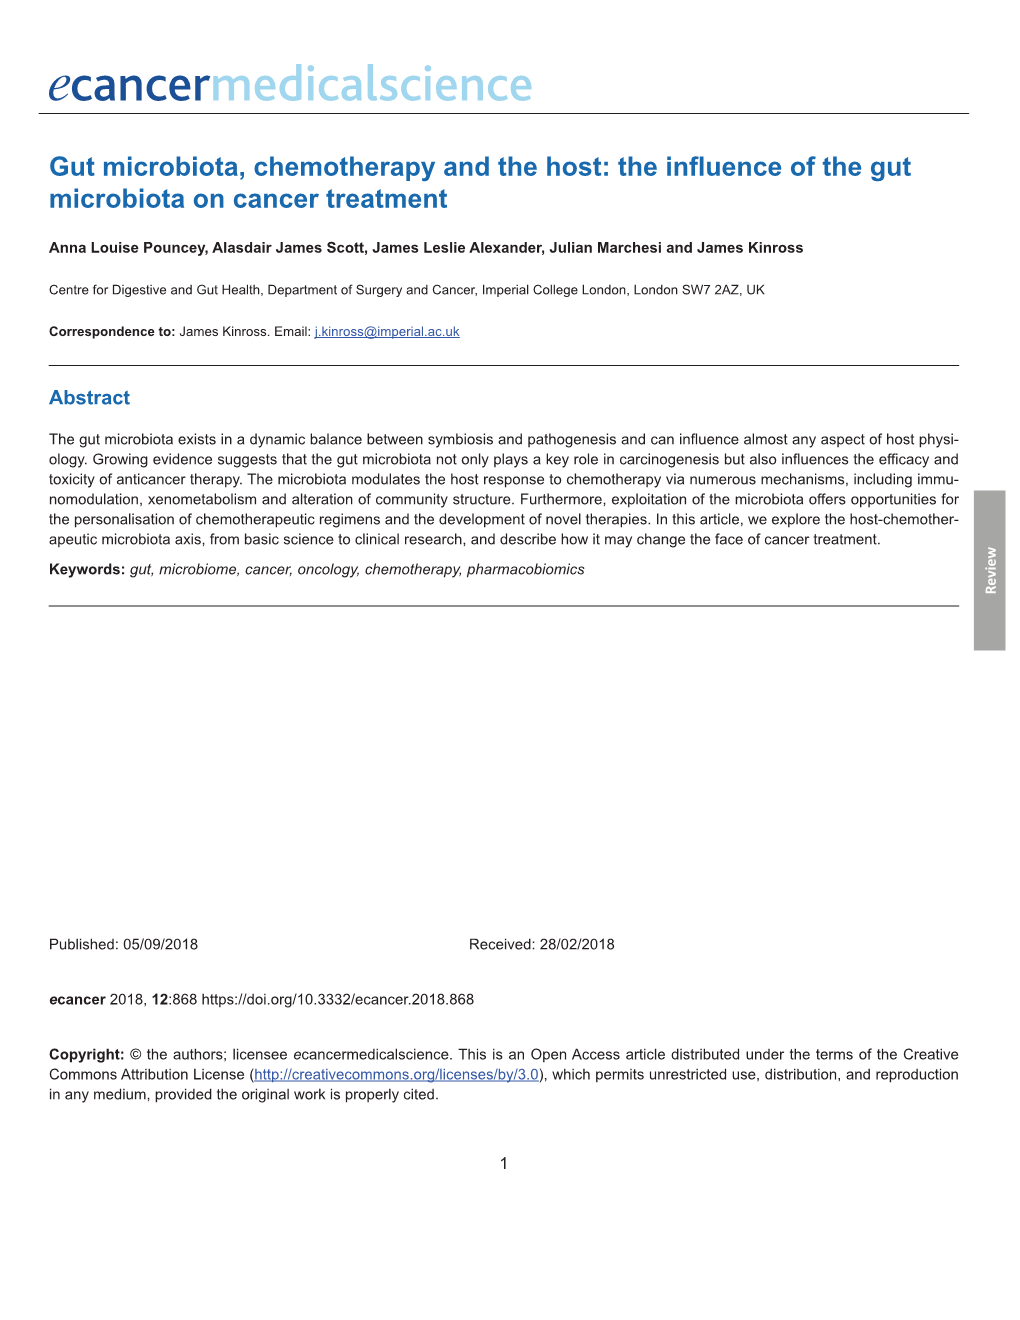 Gut Microbiota, Chemotherapy and the Host: the Influence of the Gut Microbiota on Cancer Treatment